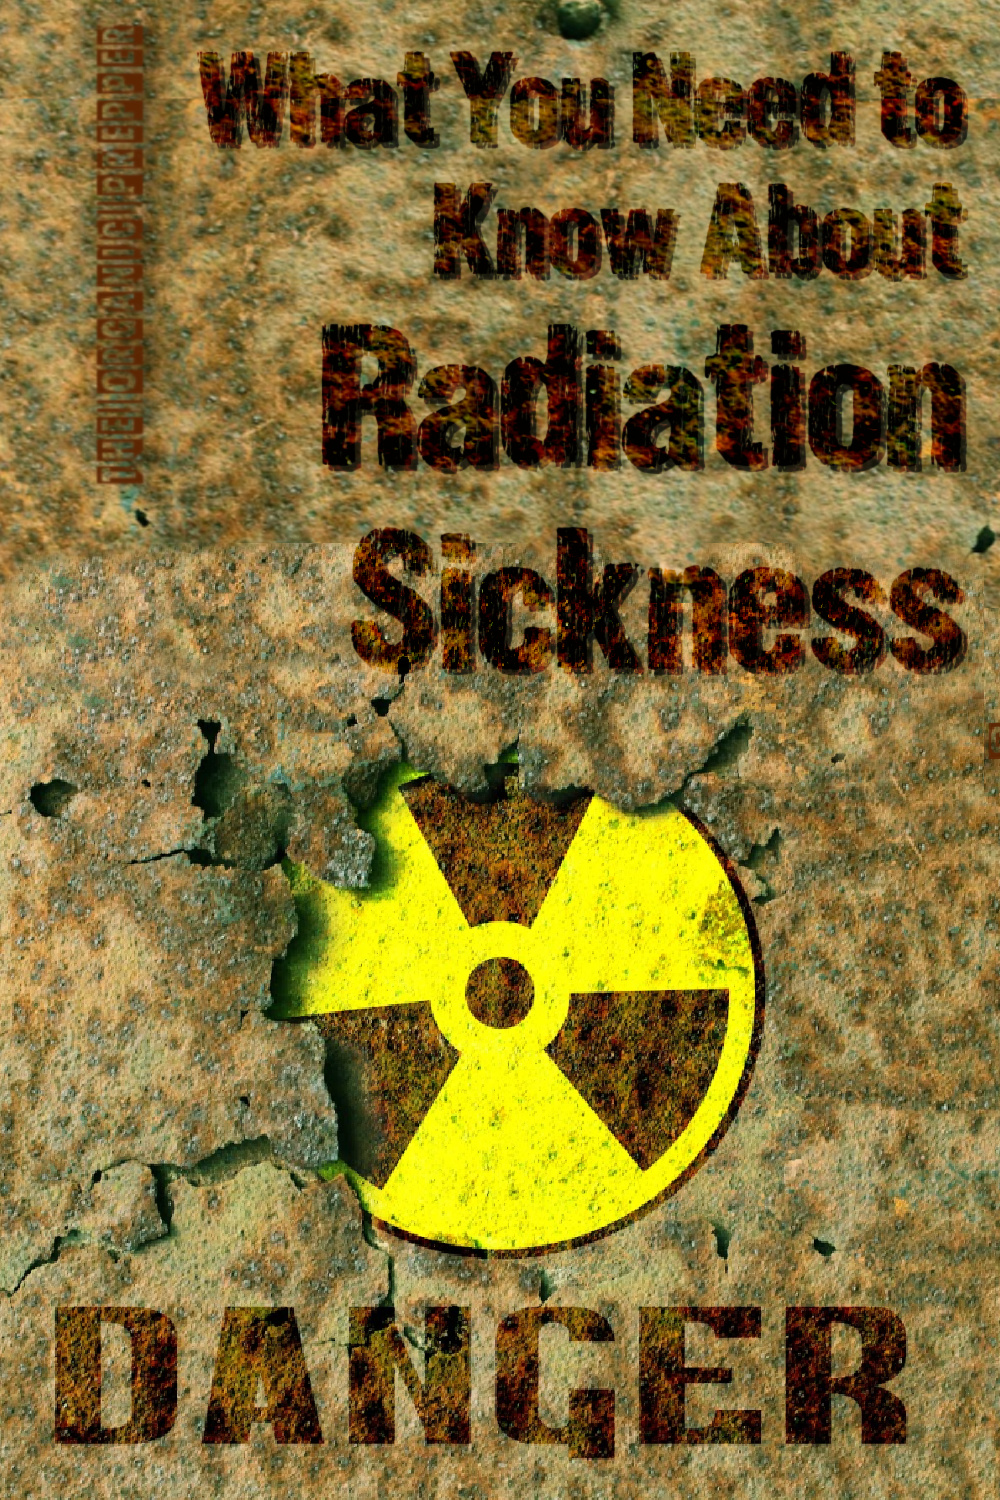 What You Need to Know About Radiation Sickness